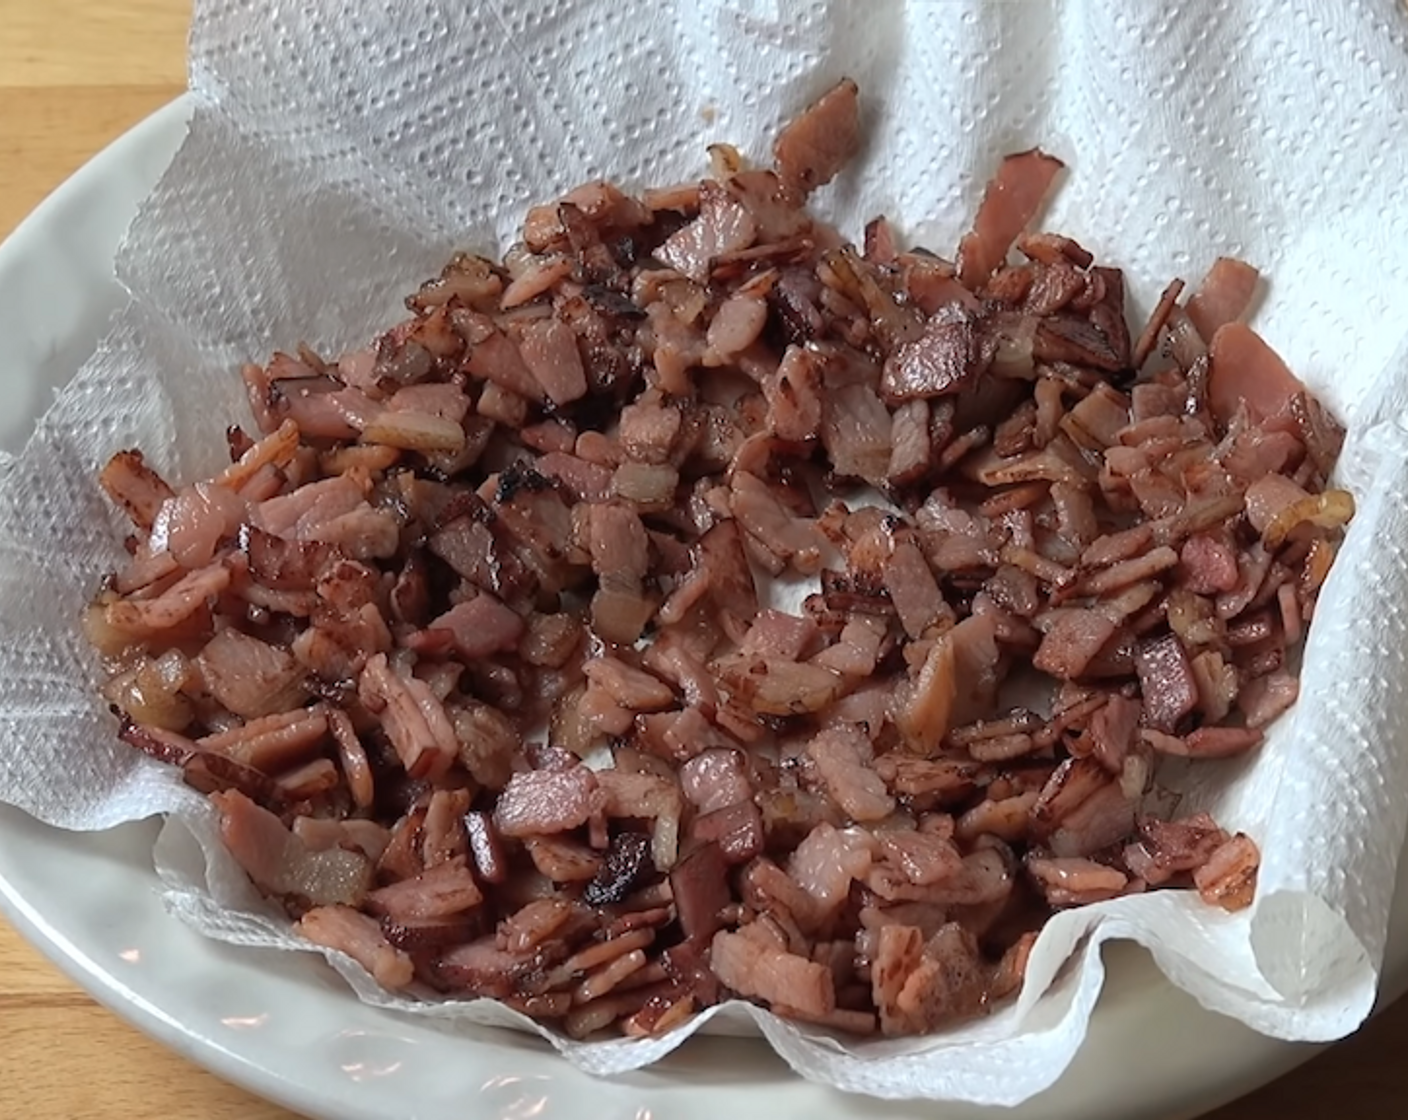 step 2 Into a fried pan over medium heat, fry the Thick-Cut Bacon (10.5 oz) until it is nice and crispy.